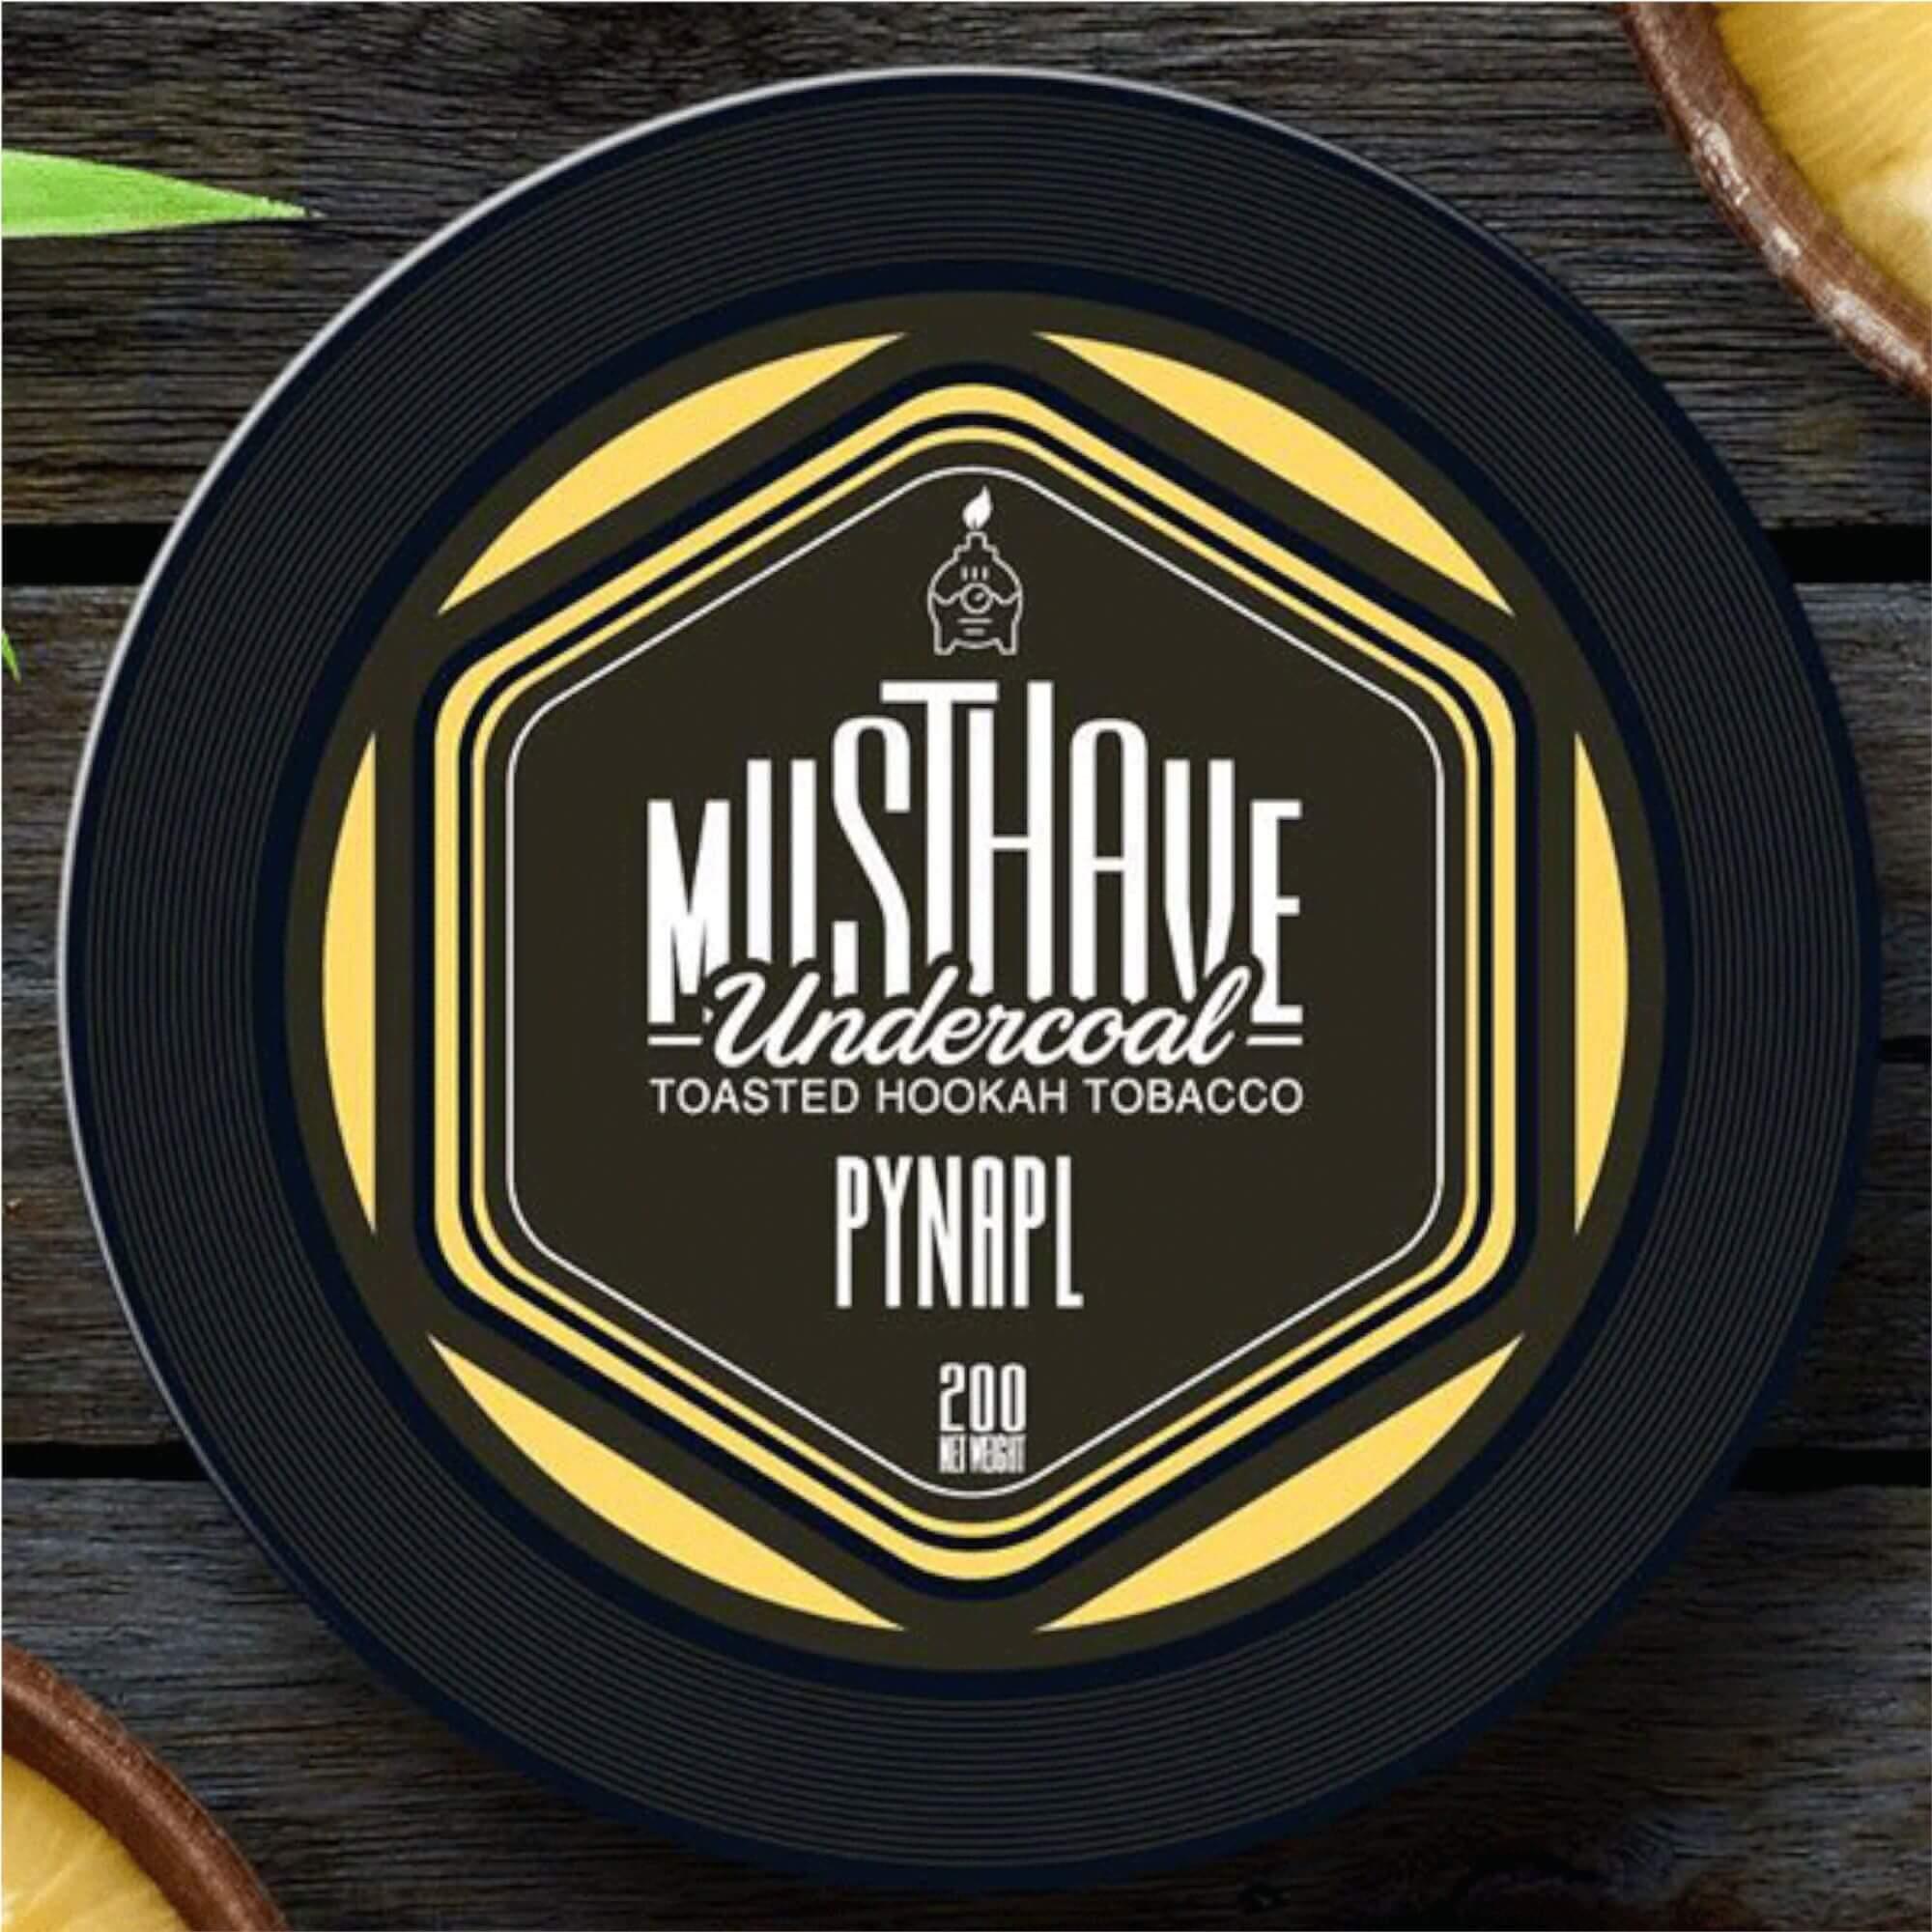 Musthave - Pynapl 200g